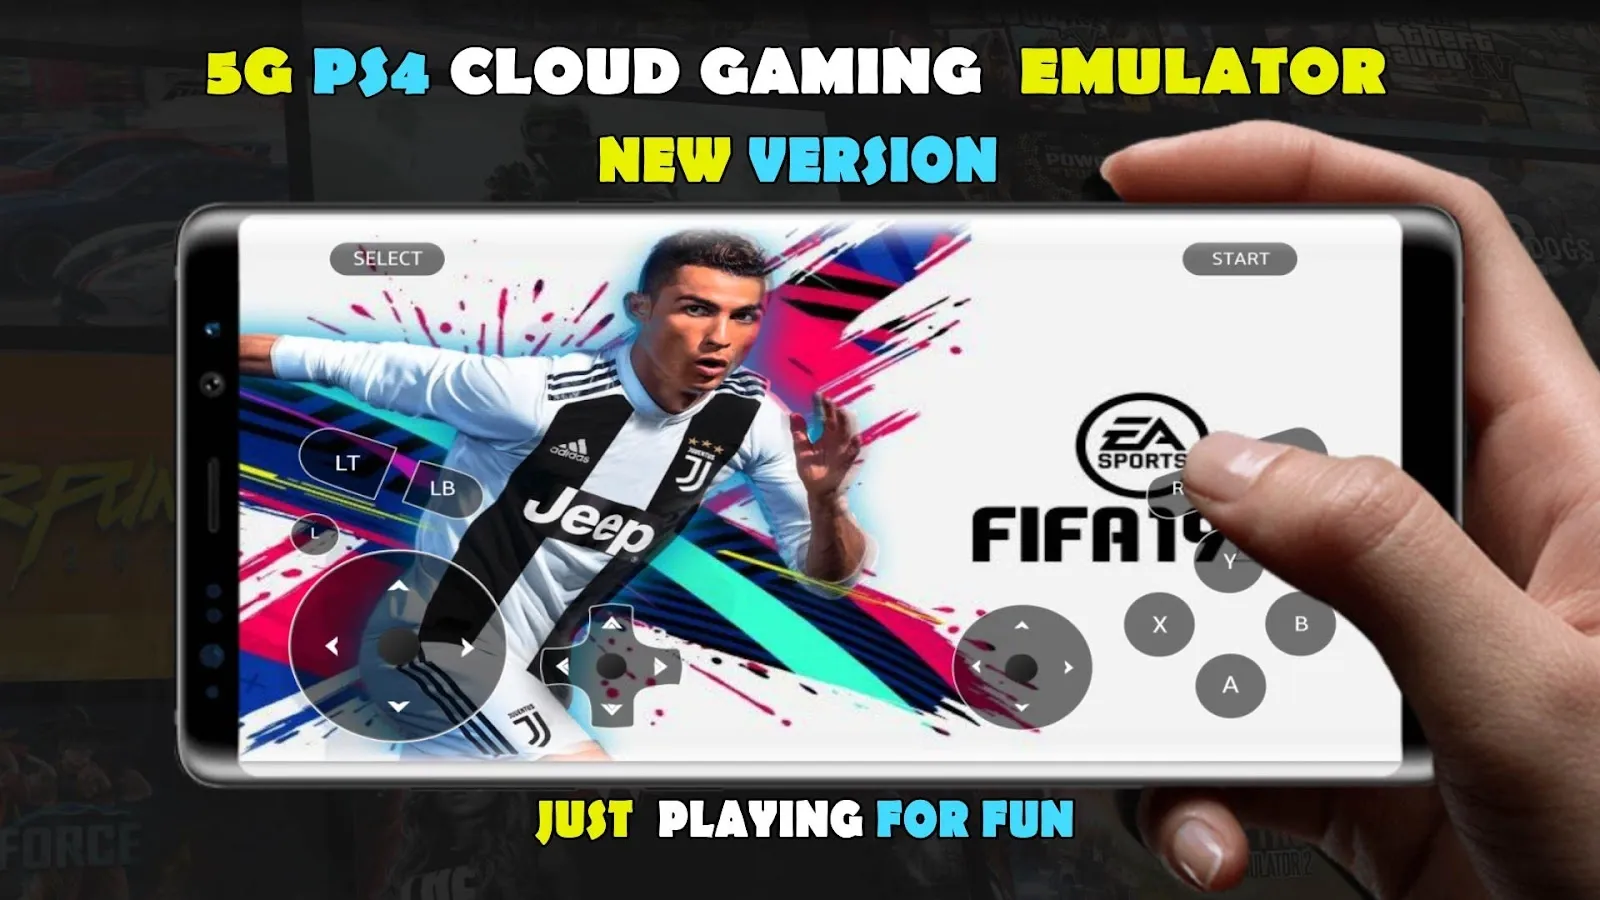 5g Cloud Games Apk Download For Android - Latest Version